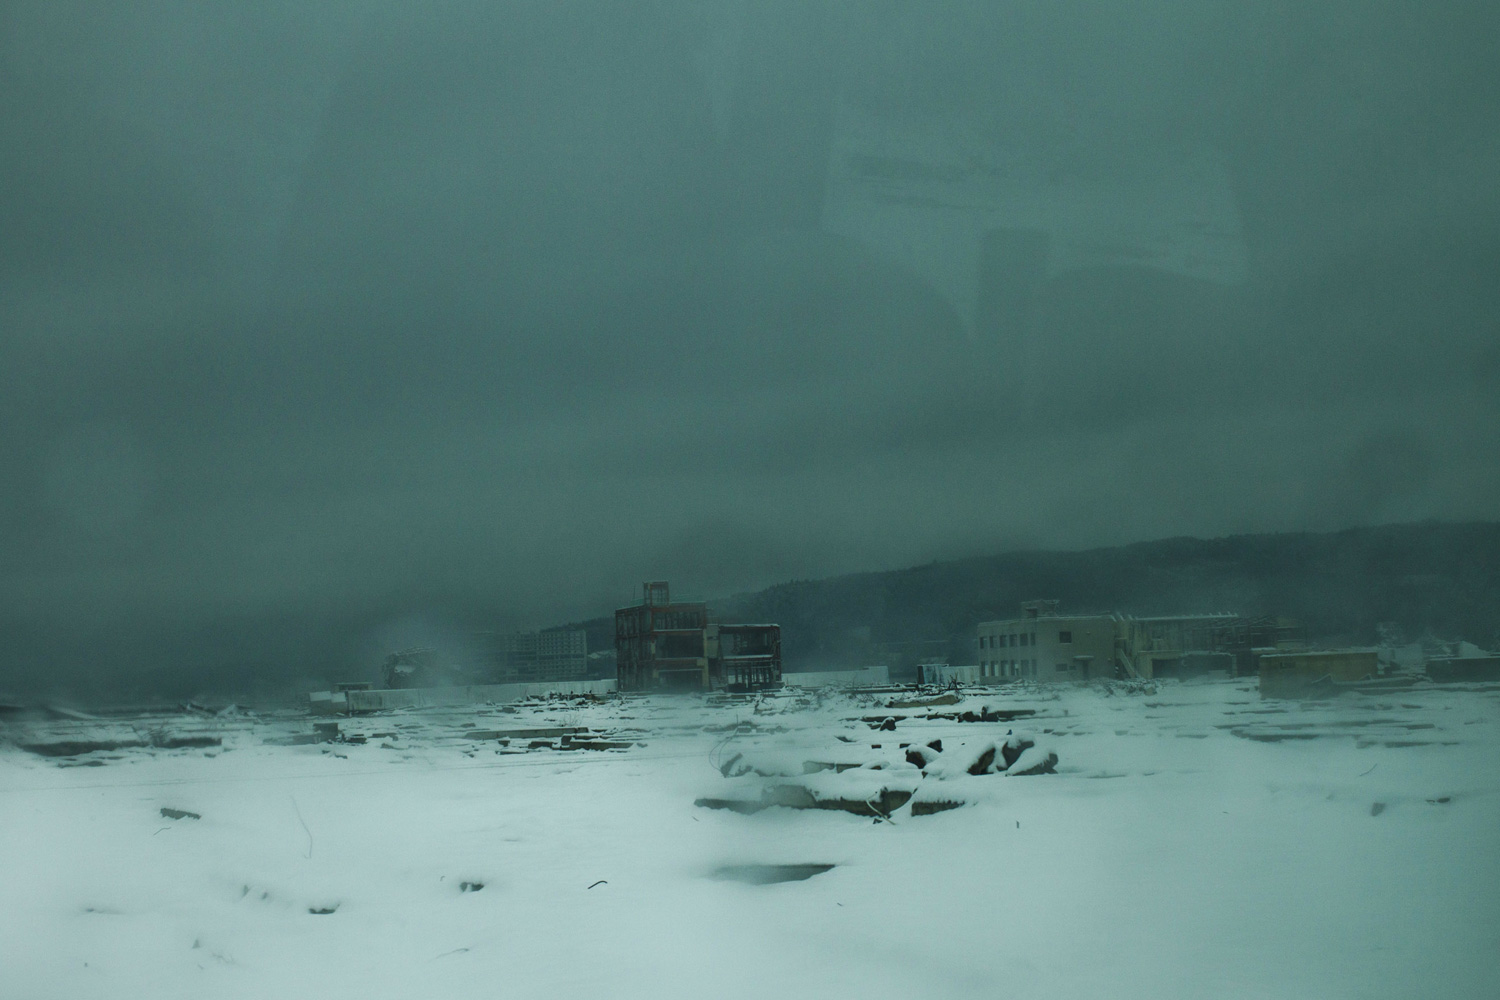 March 5, 2012. The Minamisanriku Disaster Emergency Center headquarters is seen out the window during a bus tour to learn about the effects of last year's March 11 earthquake and tsunami in Minamisanriku in Miyagi prefecture in northeastern Japan.